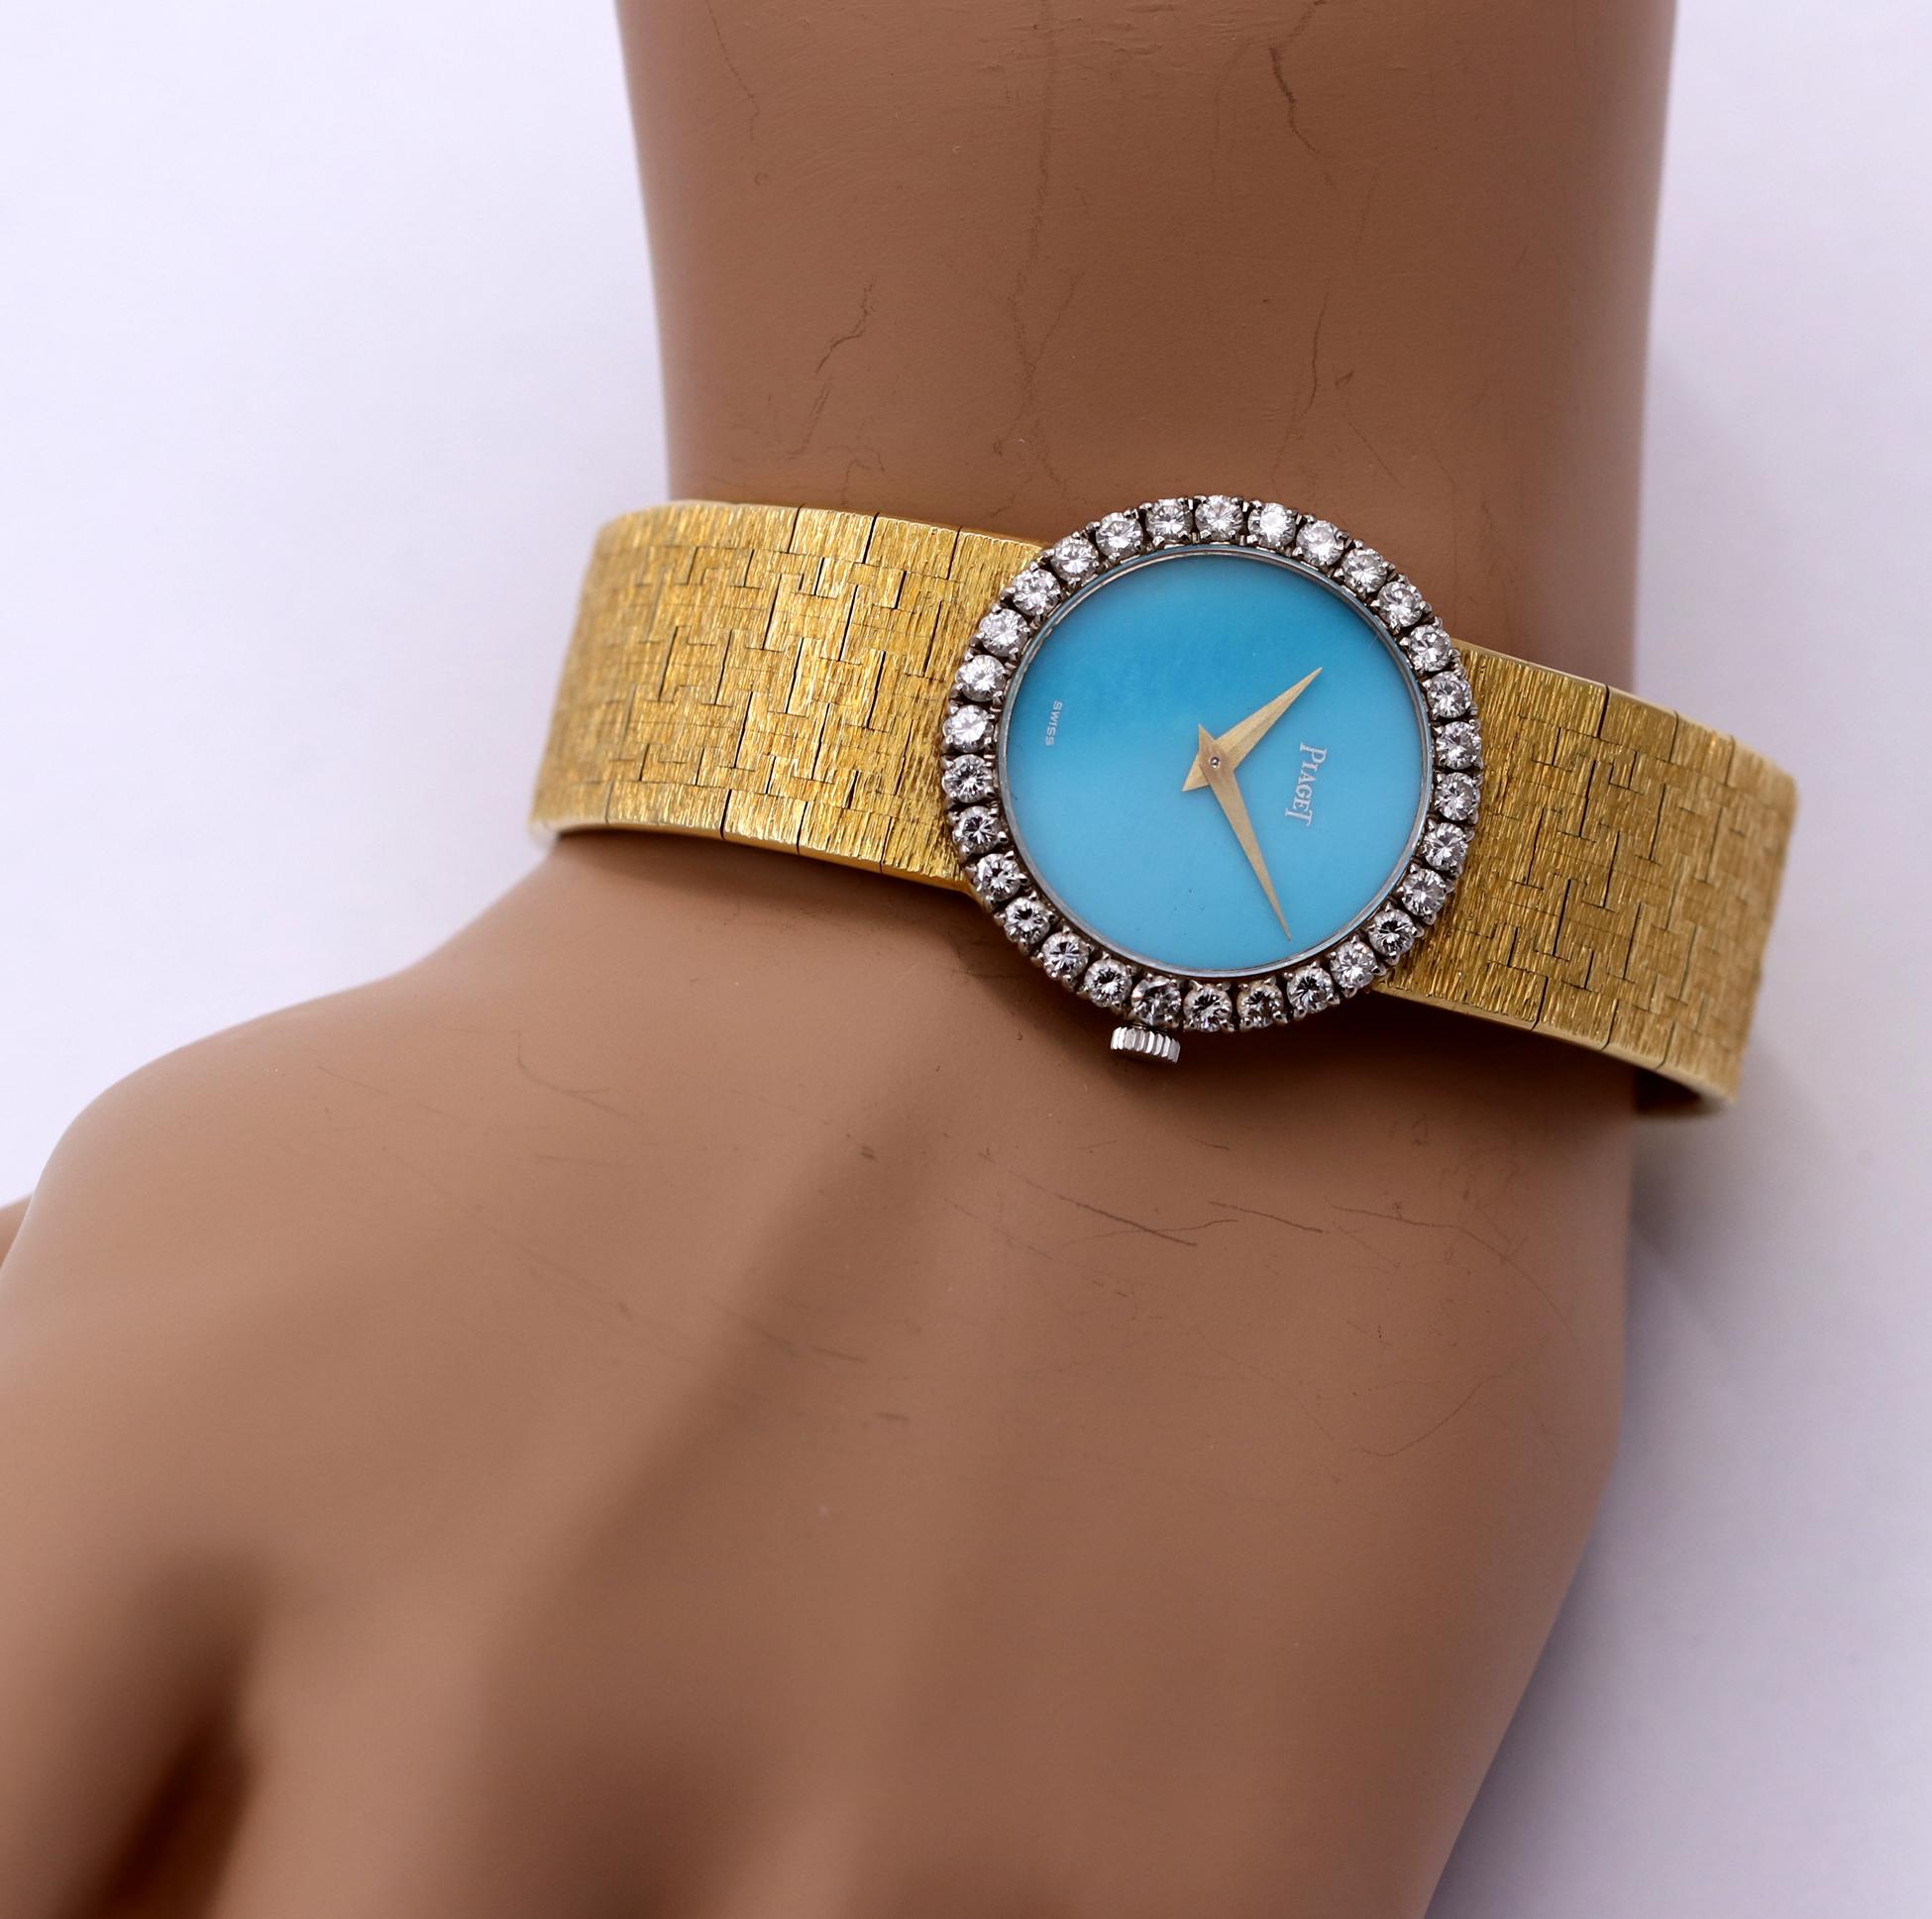 A ladies 18K yellow gold Piaget watch centered around a dial measuring 20mm in diameter. The outside of the bezel measures 27mm, and is set with 32 round brilliant cut diamonds weighing 1.65ct, total approximate weight. The dial is a robin's egg